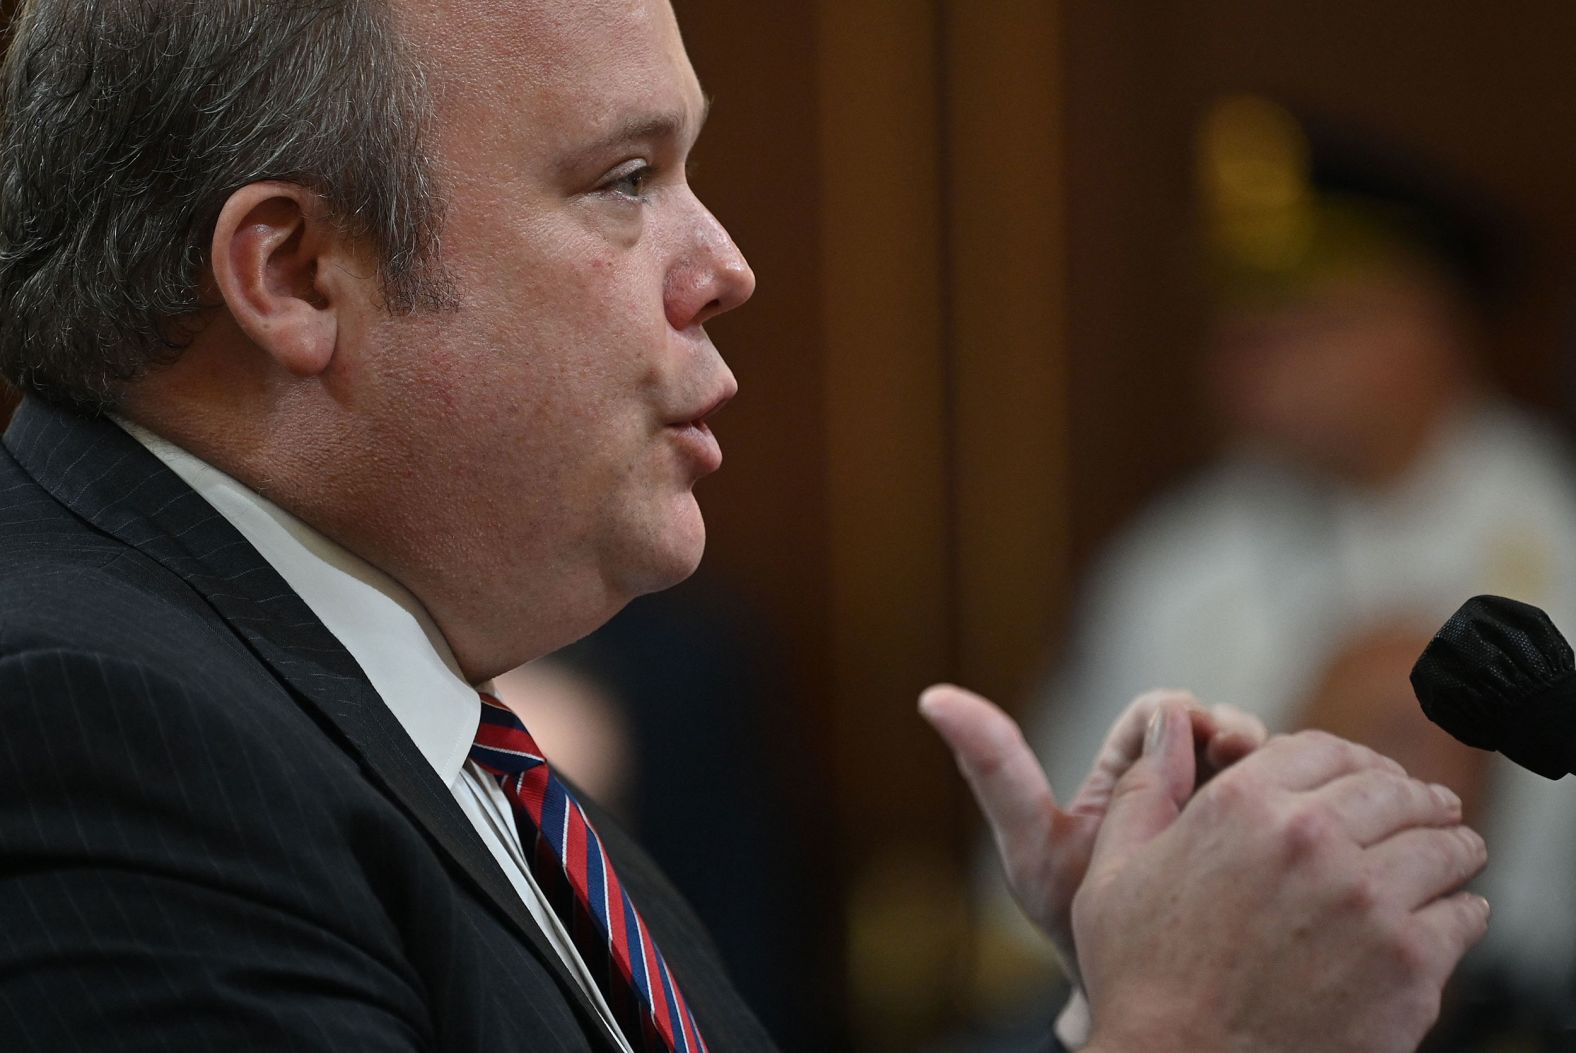 Chris Stirewalt, a former Fox digital politics editor, <a href="index.php?page=&url=https%3A%2F%2Fwww.cnn.com%2Fpolitics%2Flive-news%2Fjanuary-6-hearings-june-13%2Fh_95ba33dddae8b494fdebe9d108f97311" target="_blank">testifies during the June 13 hearing.</a> He discussed the "controversial" decision to call the state of Arizona for Biden during the 2020 presidential election. "Well, it was really controversial to our competitors who we beat so badly by making the correct call first," Stirewalt told the committee during his testimony. He said that his team "knew it would be a consequential call" because Arizona was one of the states "that mattered." He added that their team "knew Trump's chances were very small and getting smaller based on what we had seen."